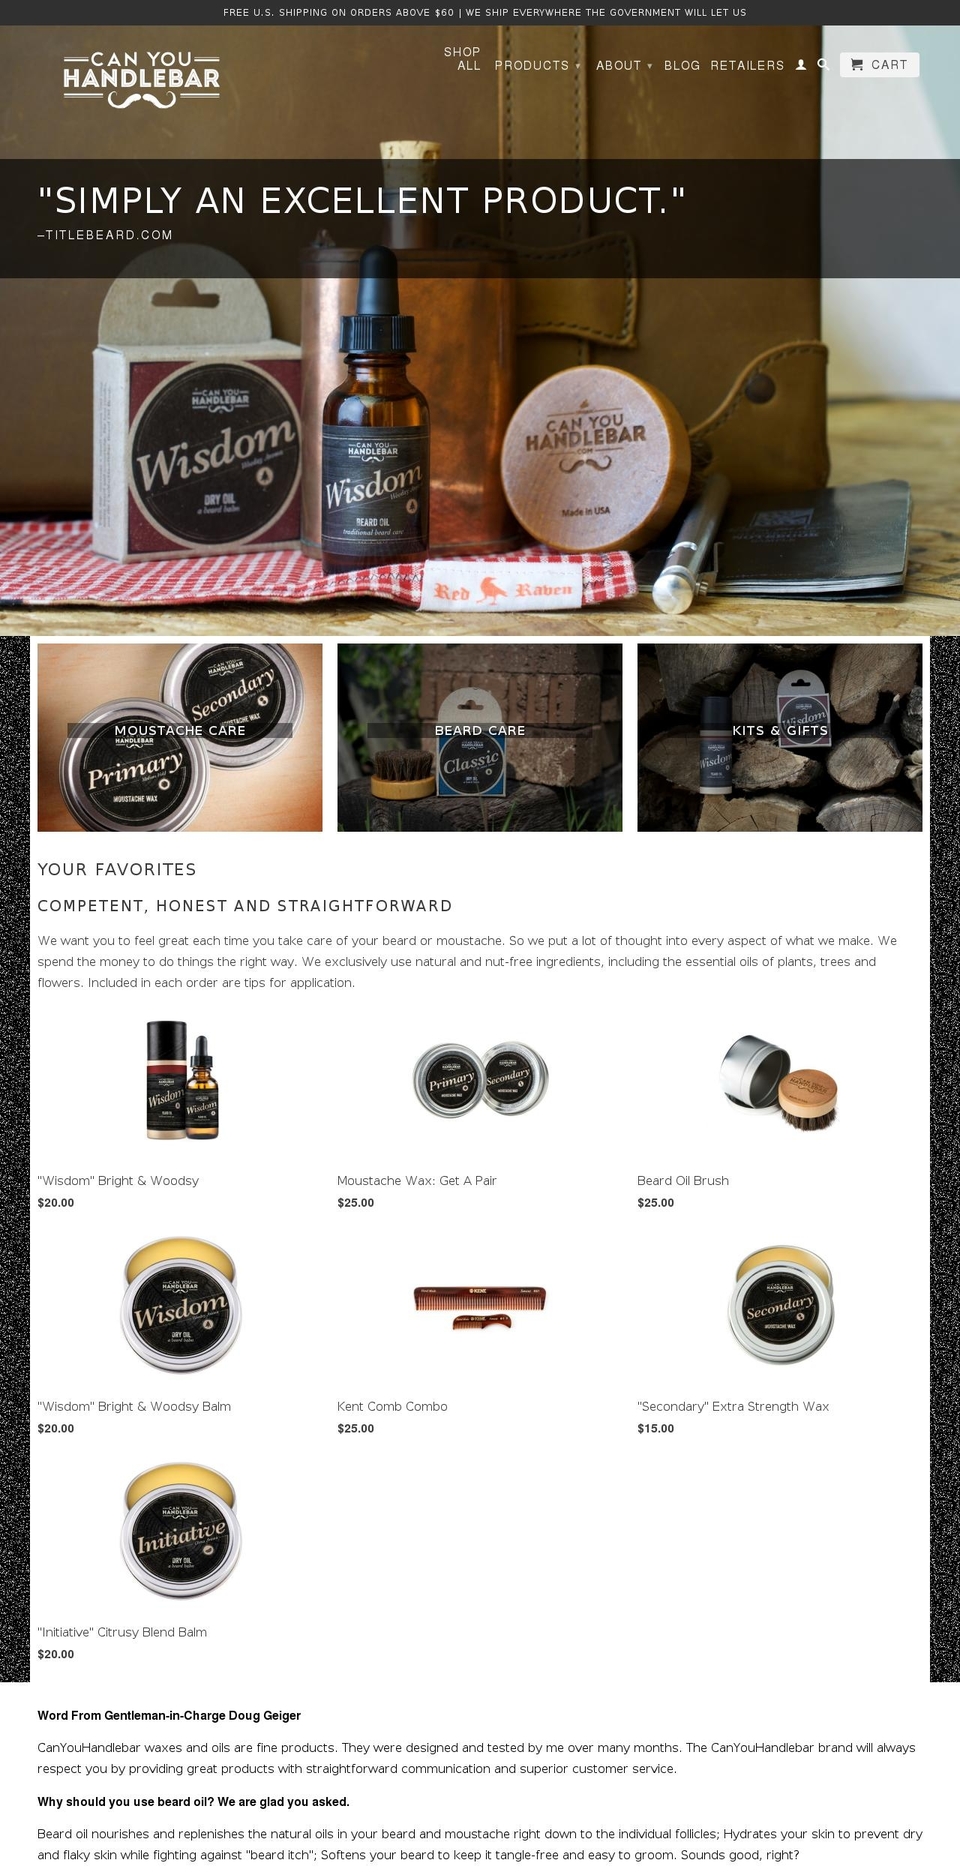 Dawn Shopify theme site example canyouhandlebar.com